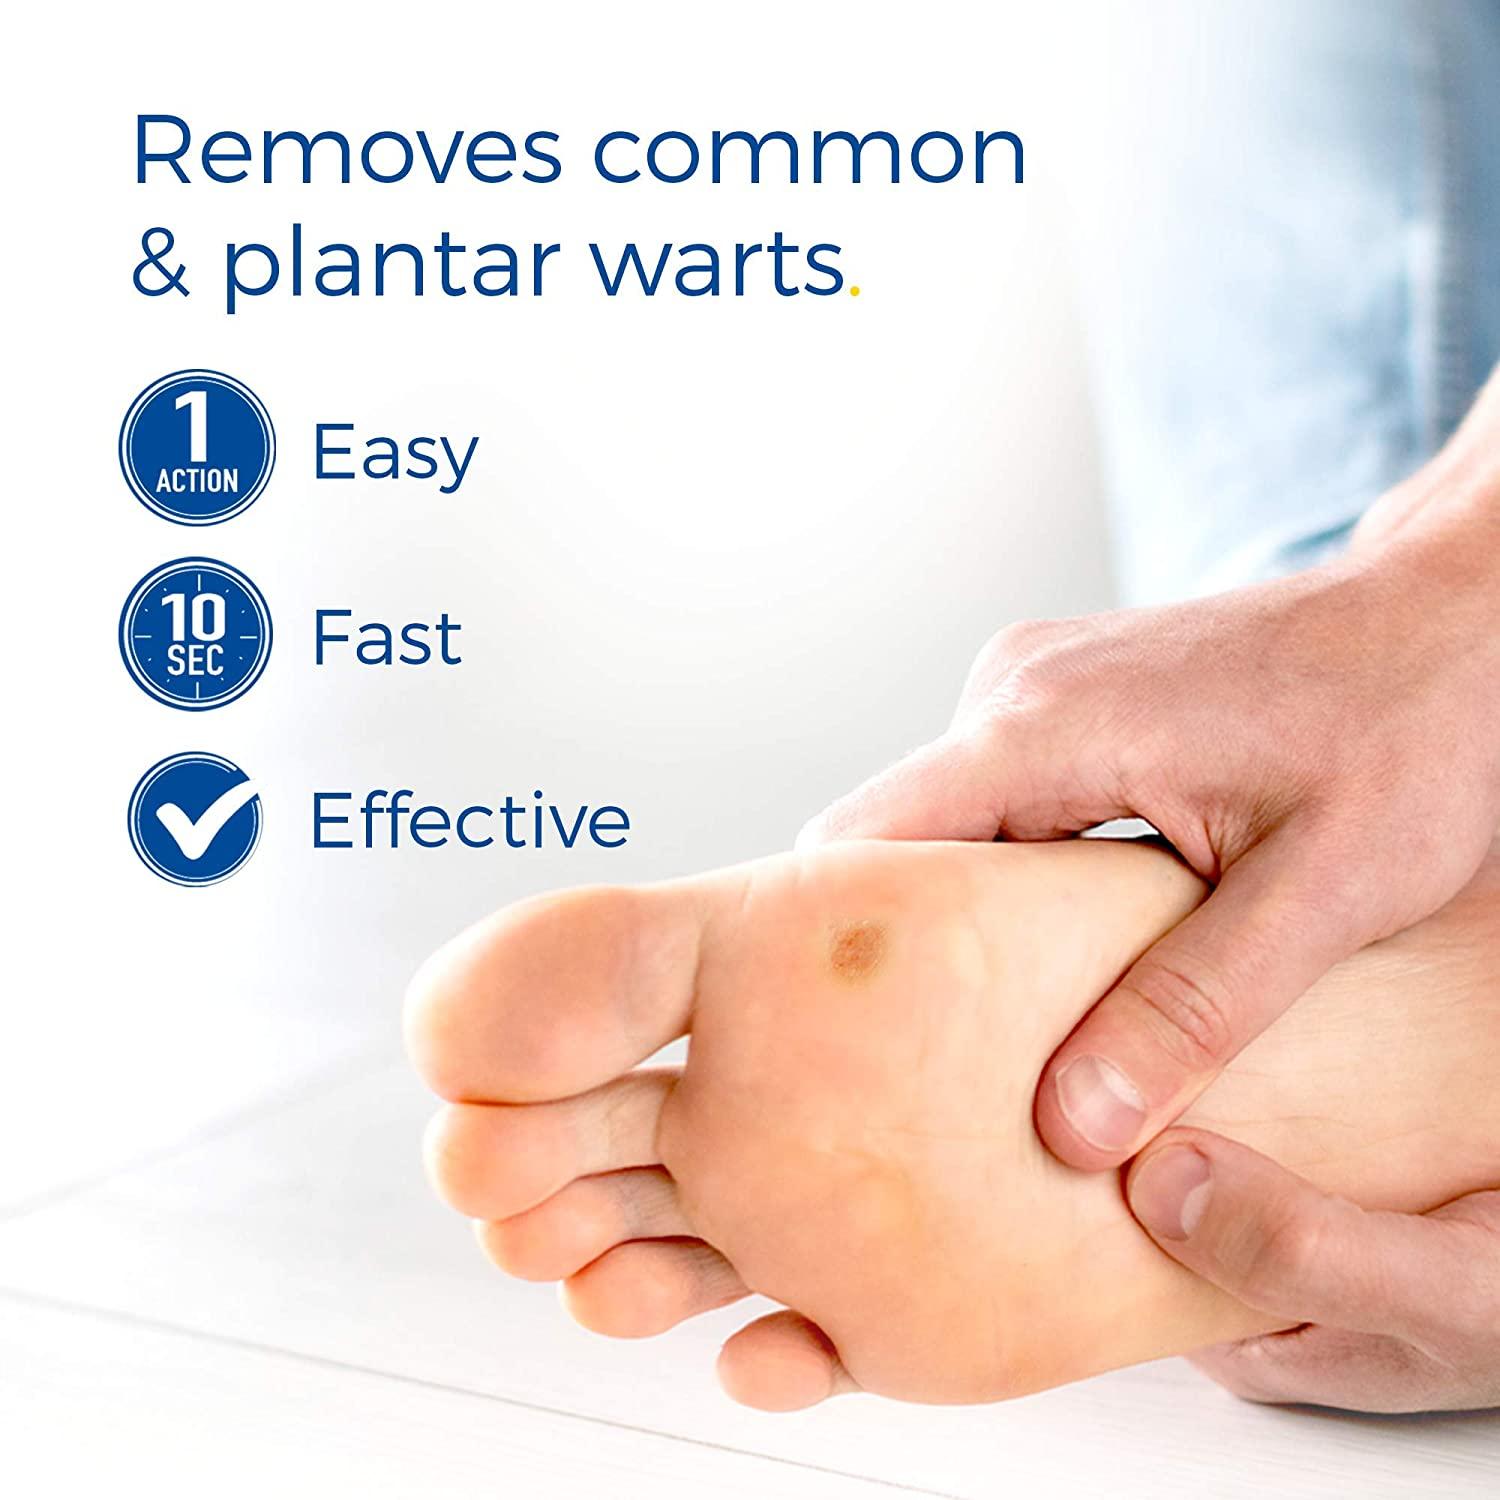 Freeze Away MAX® Plantar Wart Remover | Dr. Scholl's